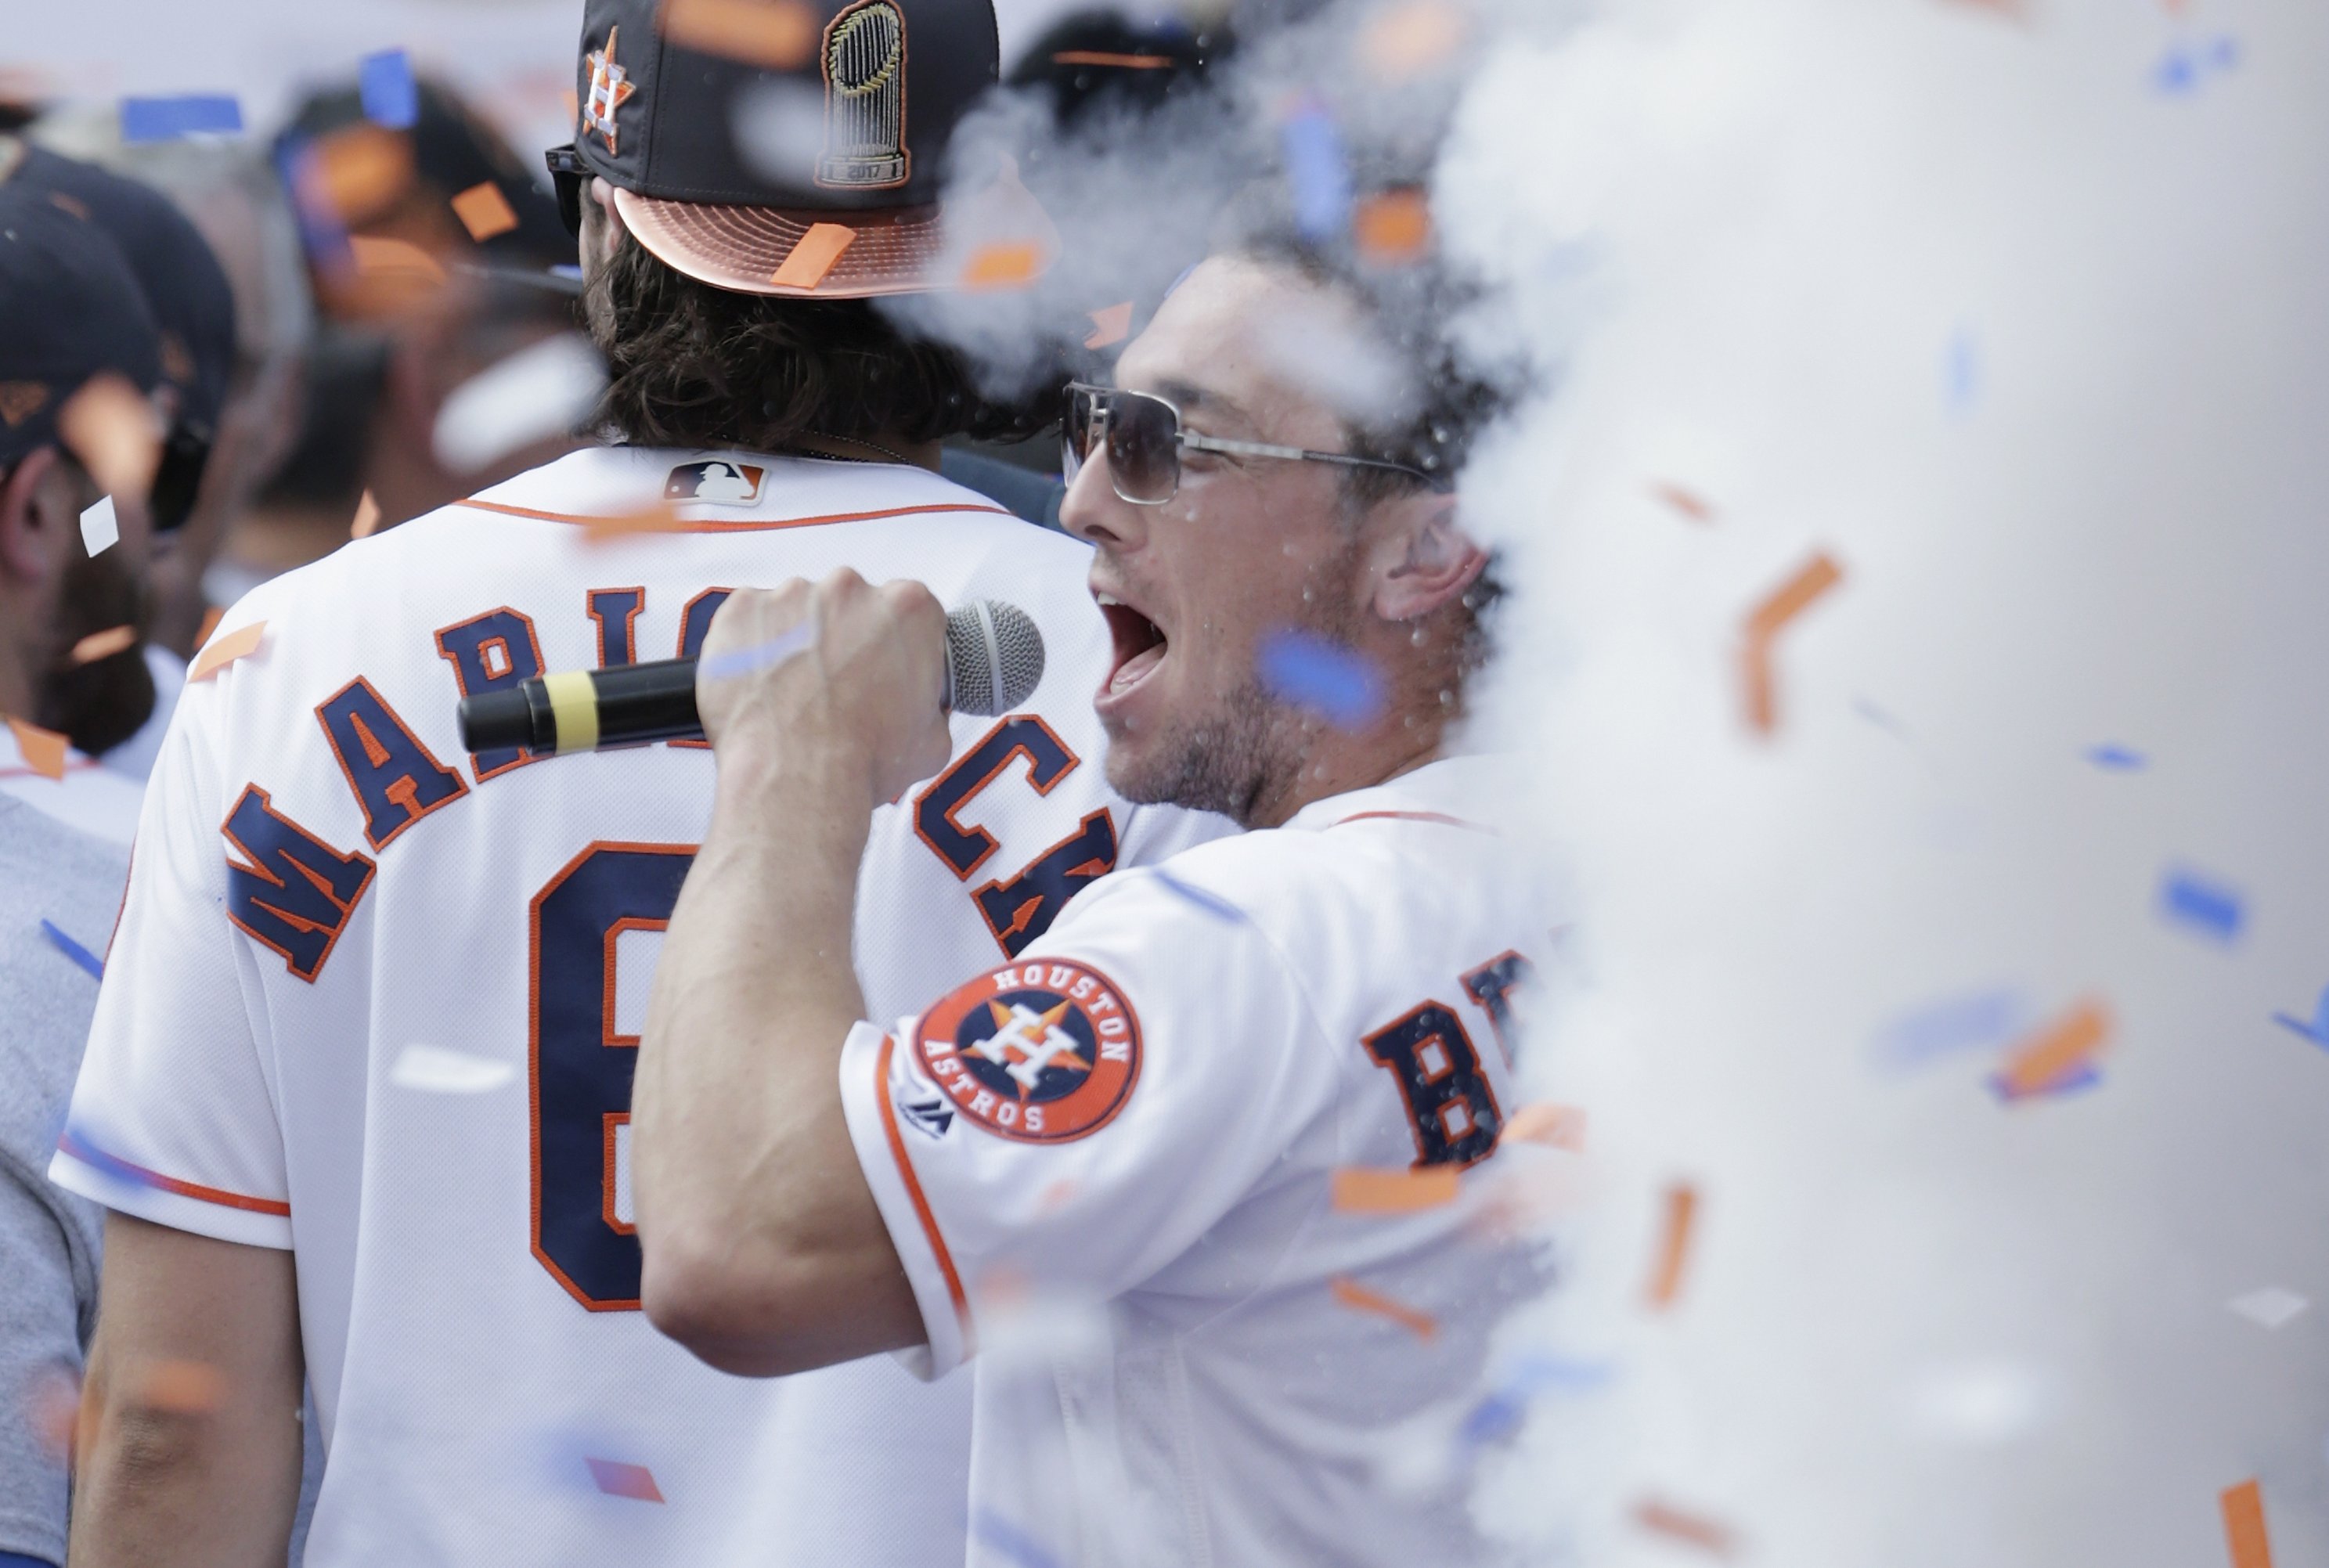 Houston Astros on X: The #Astros will wear these totally awesome